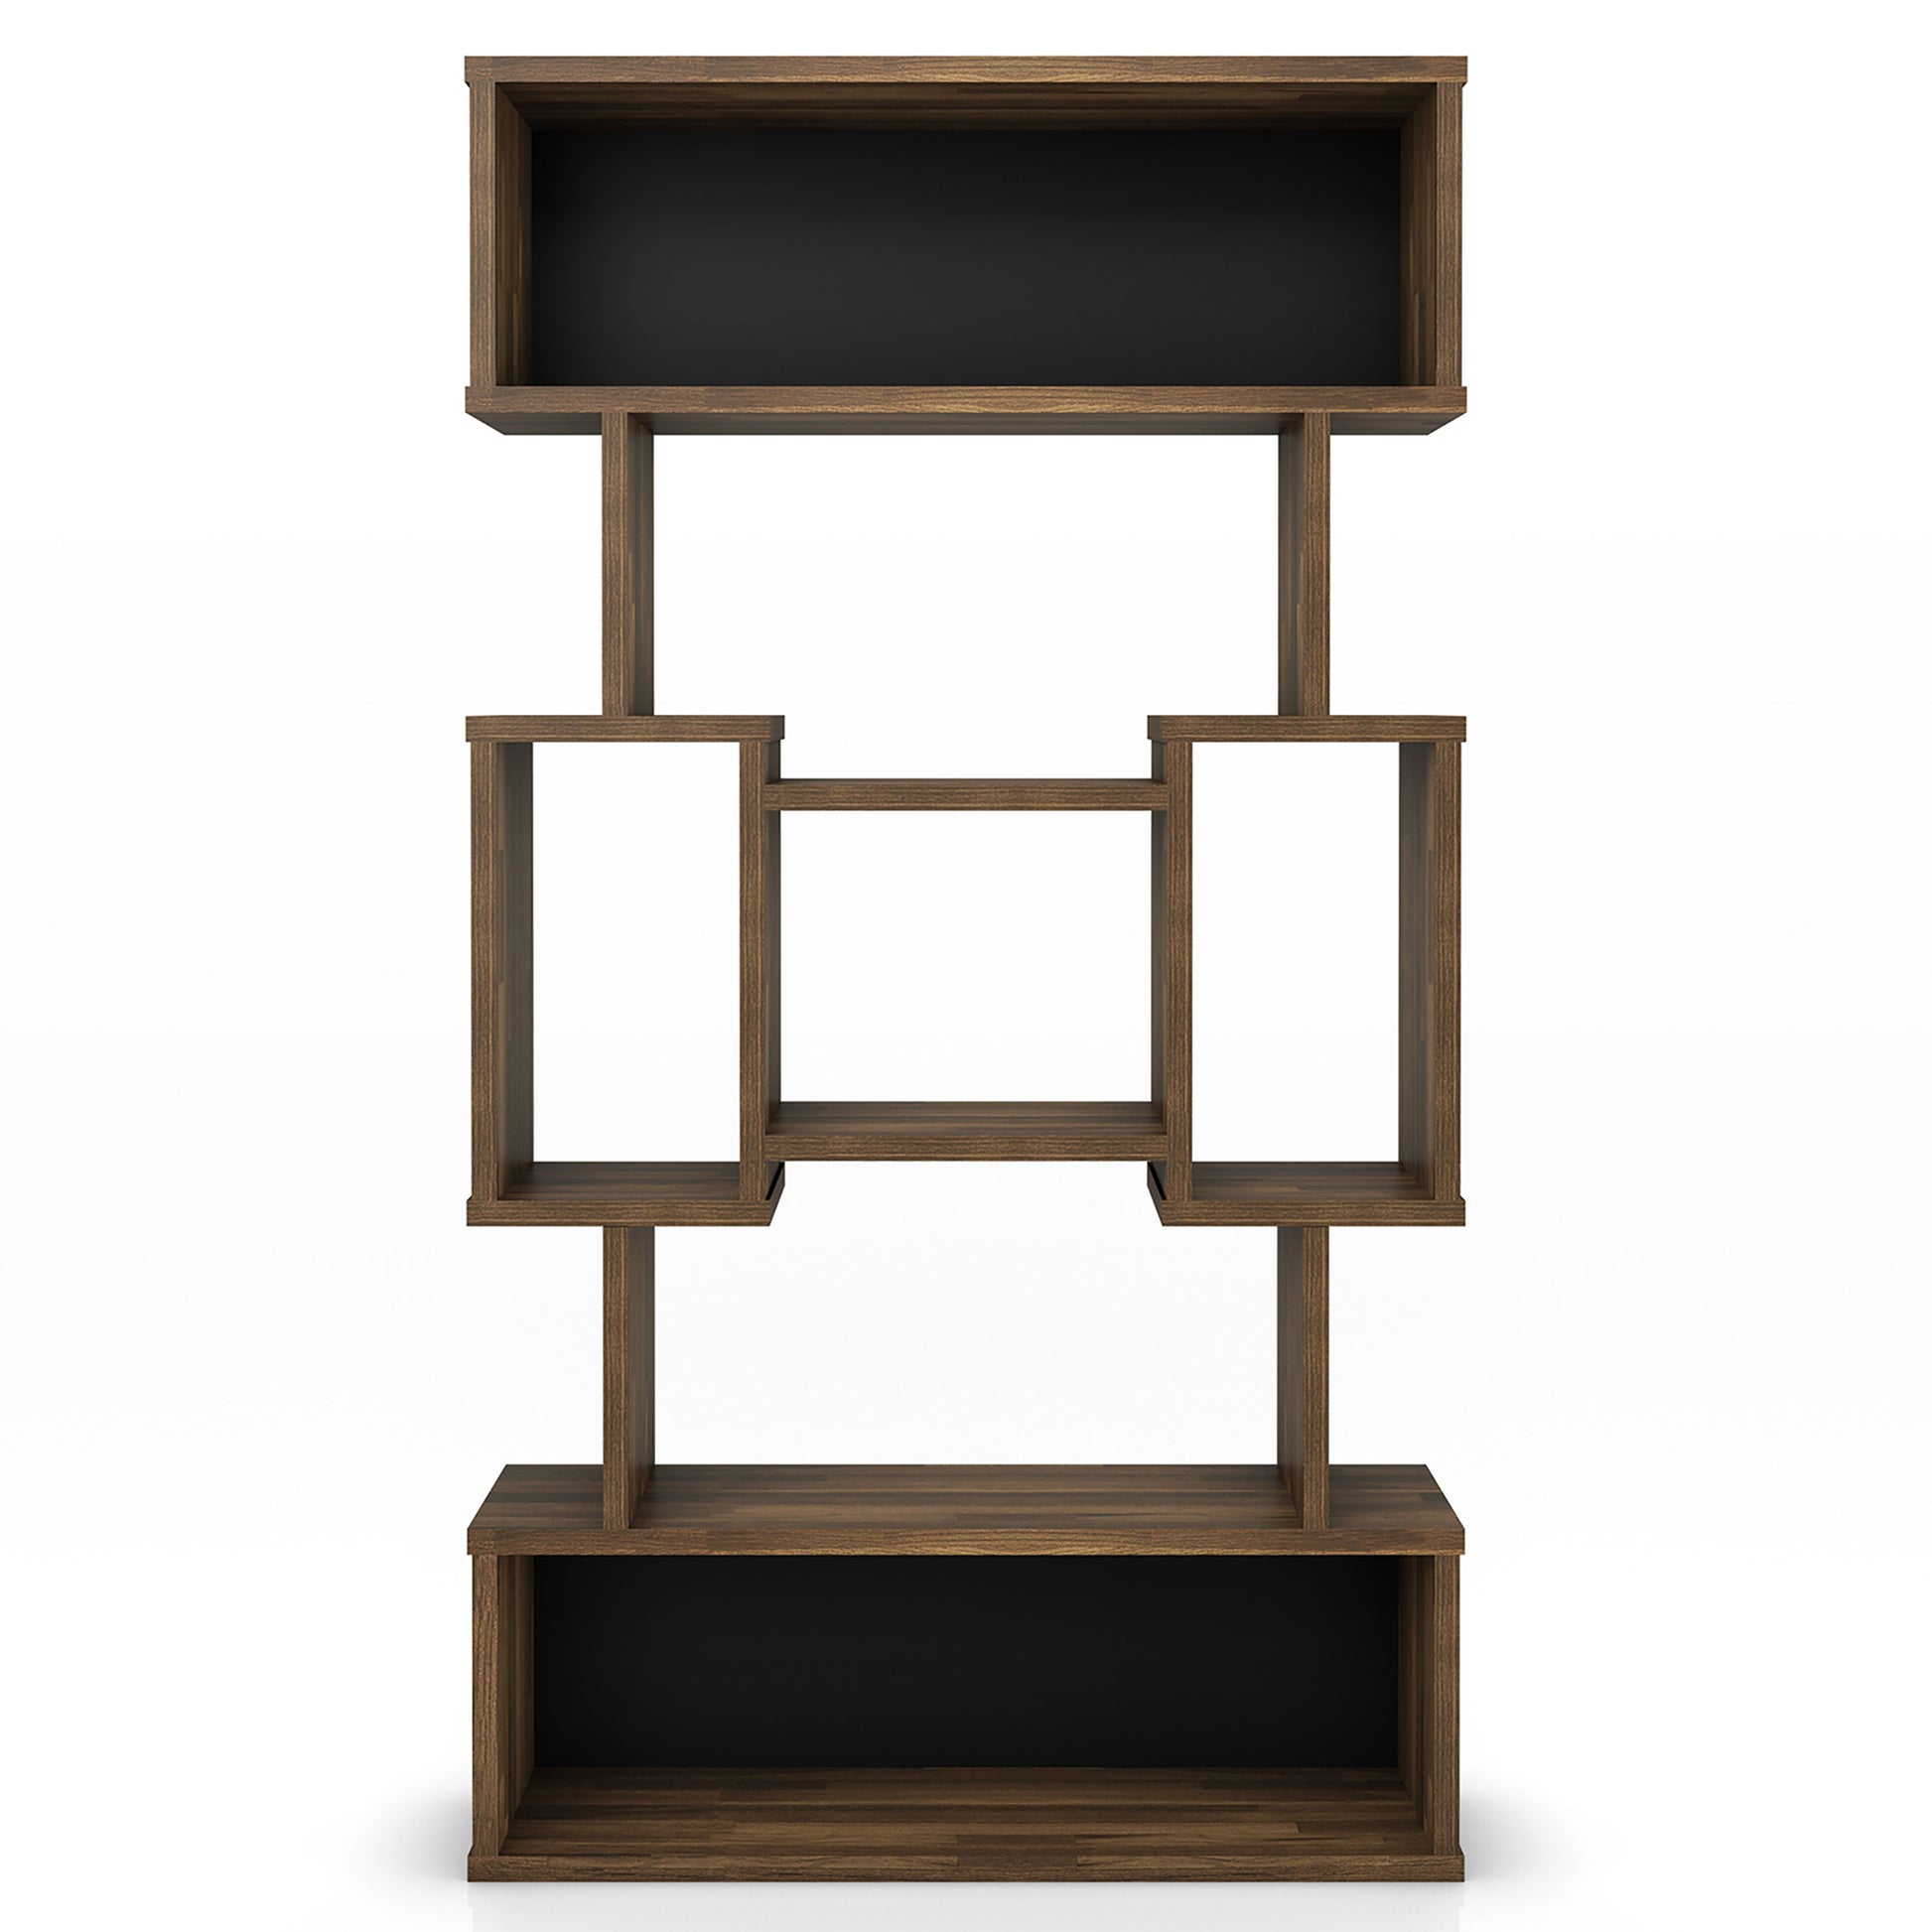 Front-facing modern light hickory open cubic bookcase display shelf on a white background